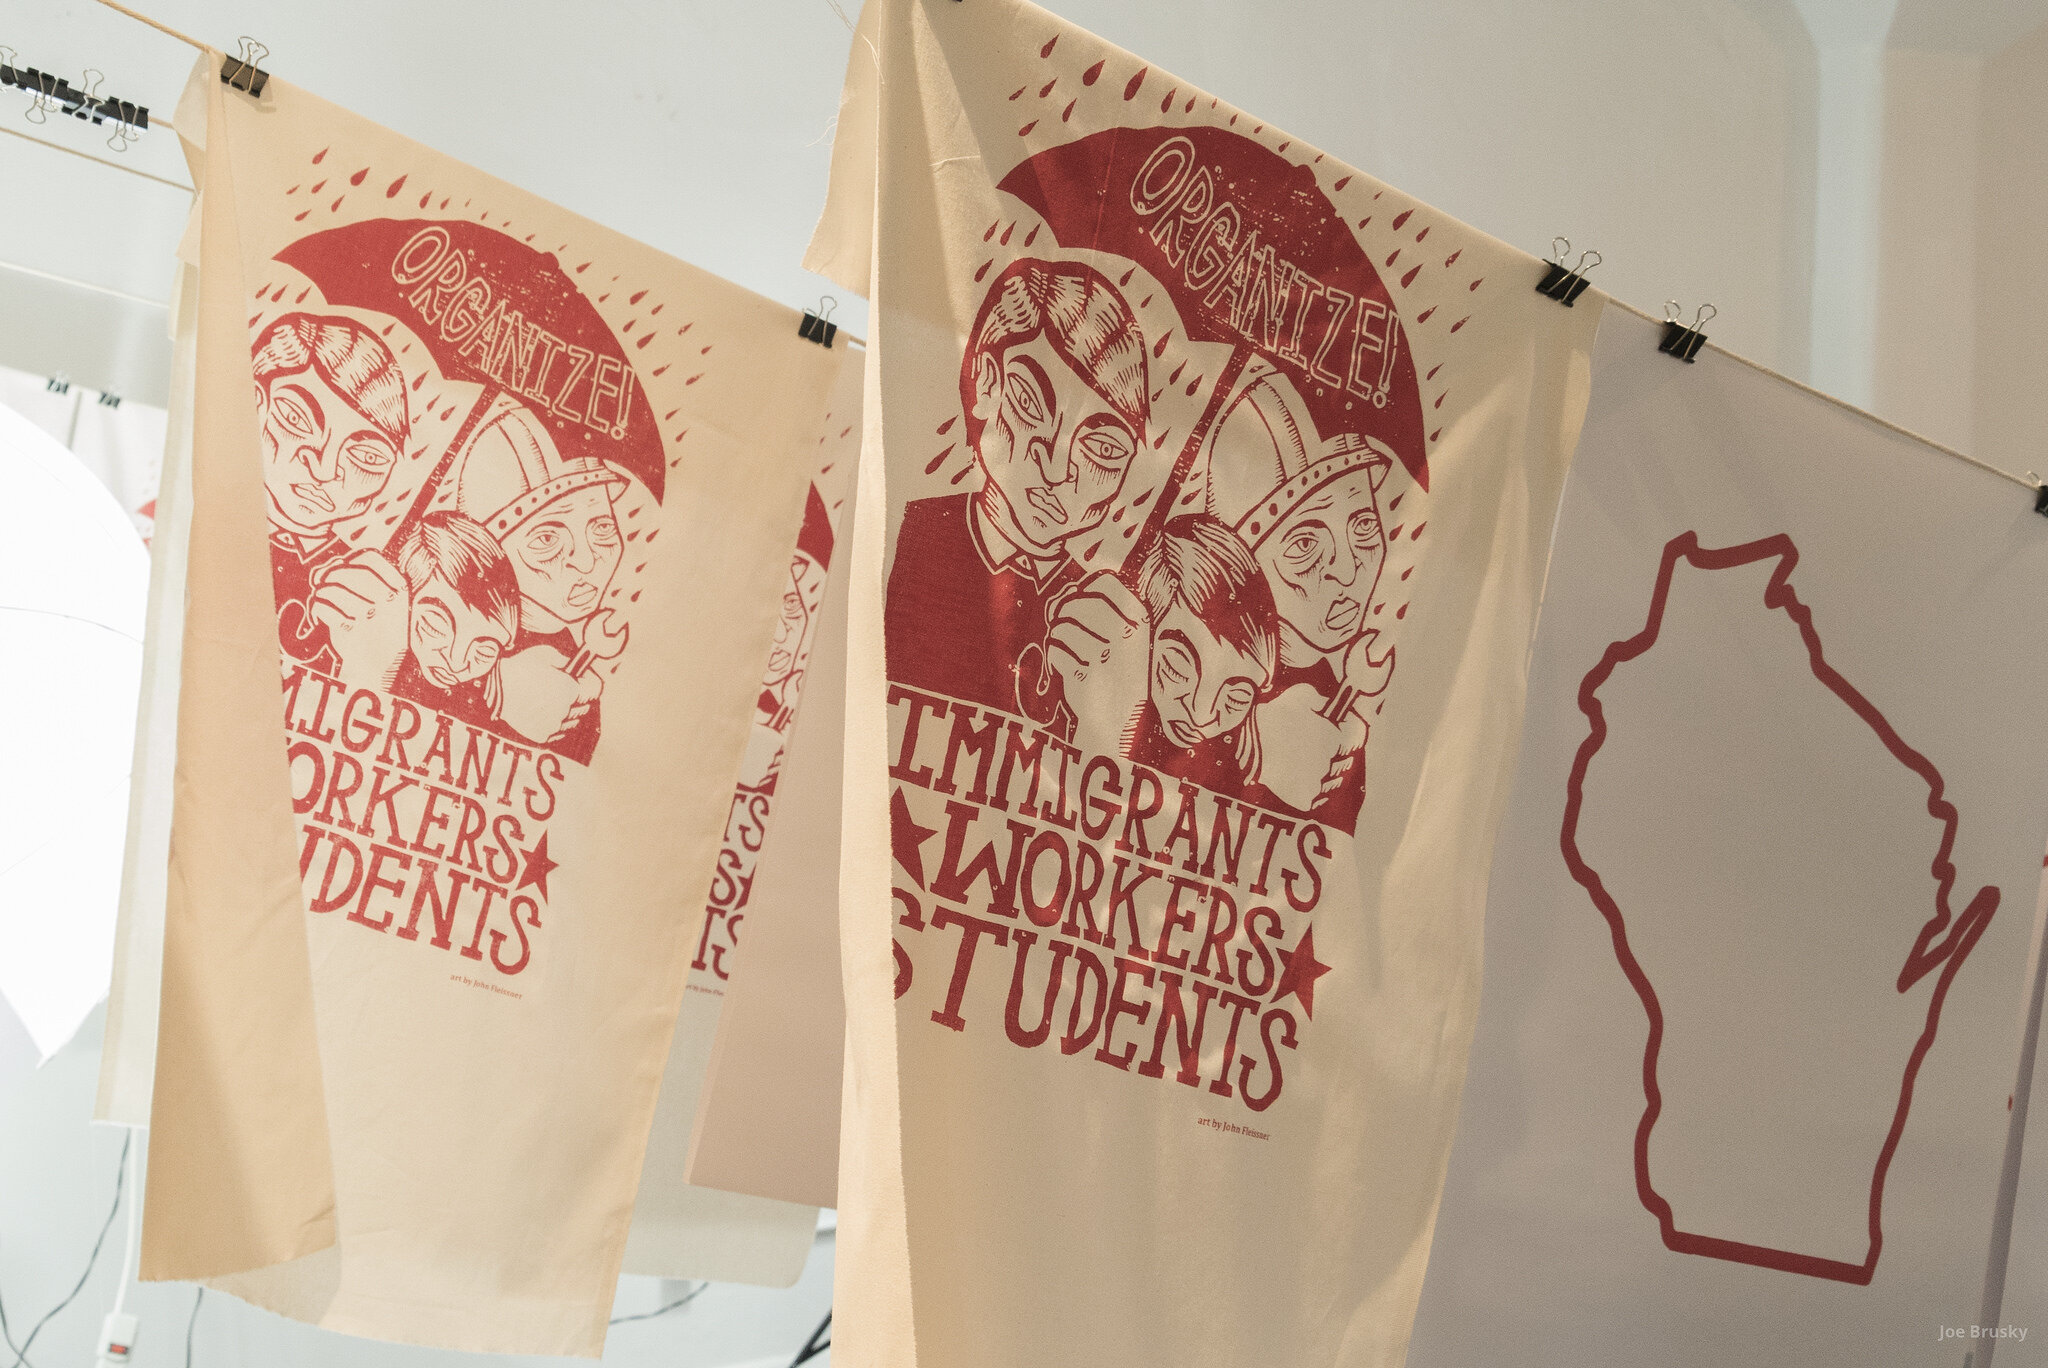  Pro Public Education banners, parachutes, and screen printed picket signs are produced at an art build with Milwaukee Teachers Education Association.  